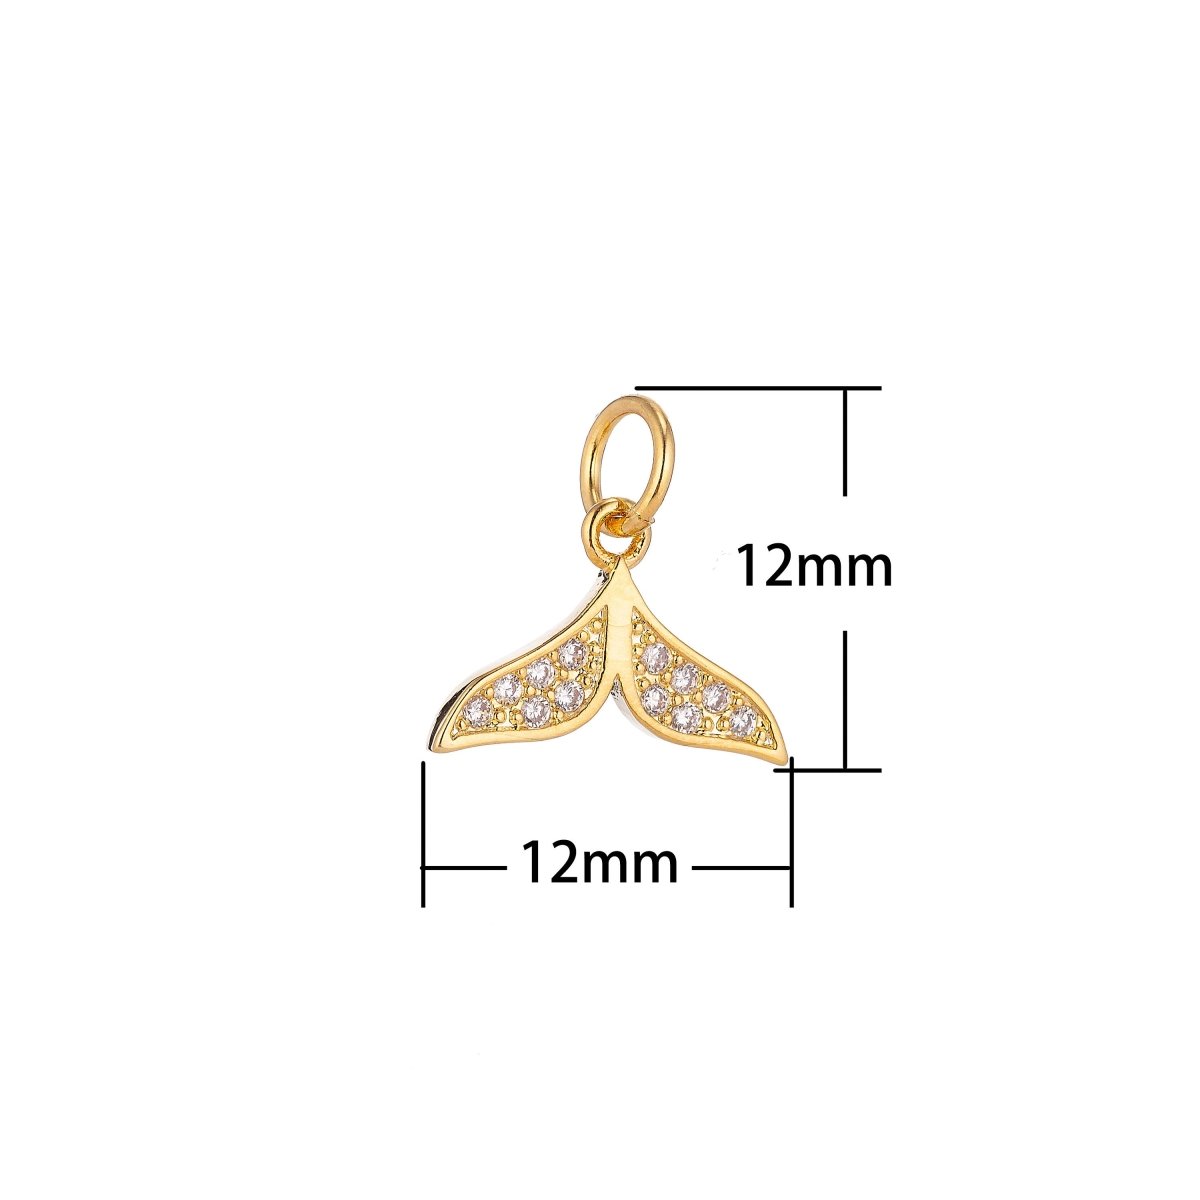 18K Gold Filled Lovely Mermaid Tail Cubic Zirconia Necklace Pendant Bracelet Earring Charm for Jewelry Making C-073 - DLUXCA